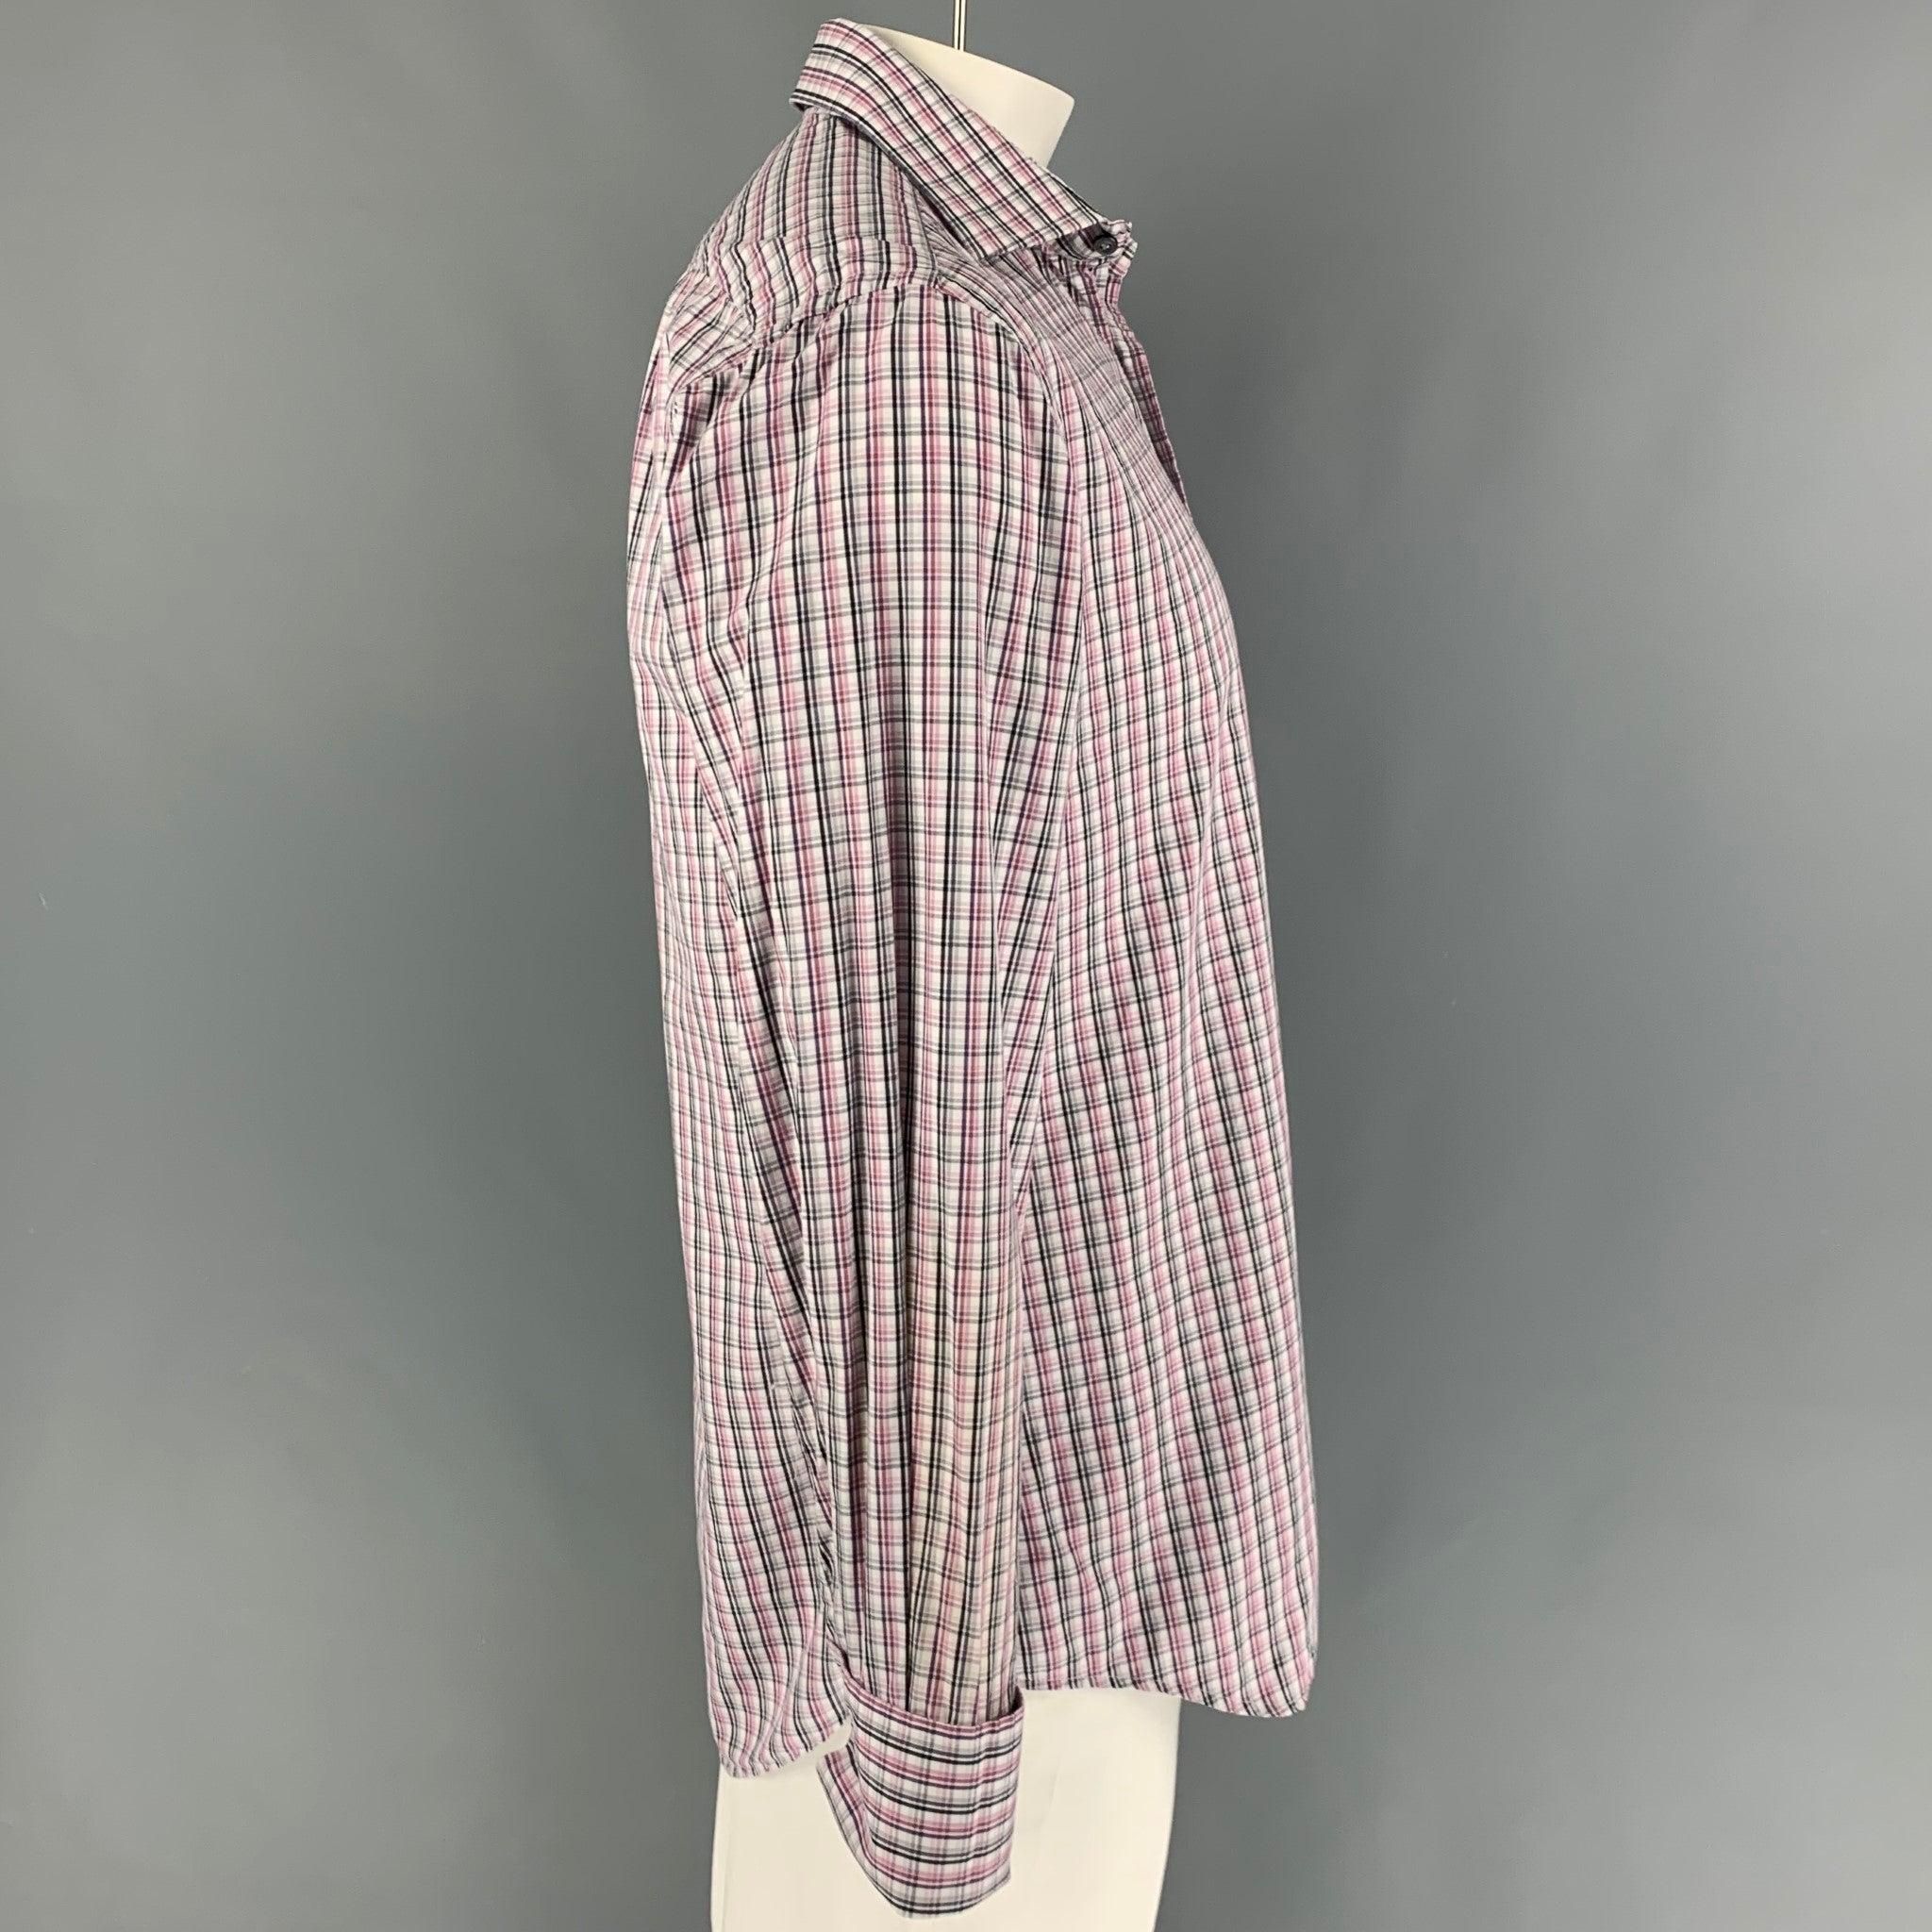 PAUL SMITH long sleeve shirt comes in a white & burgundy plaid cotton featuring a spread collar, french cuffs, patch pocket, and a button up closure. Cufflinks included. Very Good
Pre-Owned Condition. 

Marked:   16/41 

Measurements: 
 
Shoulder: